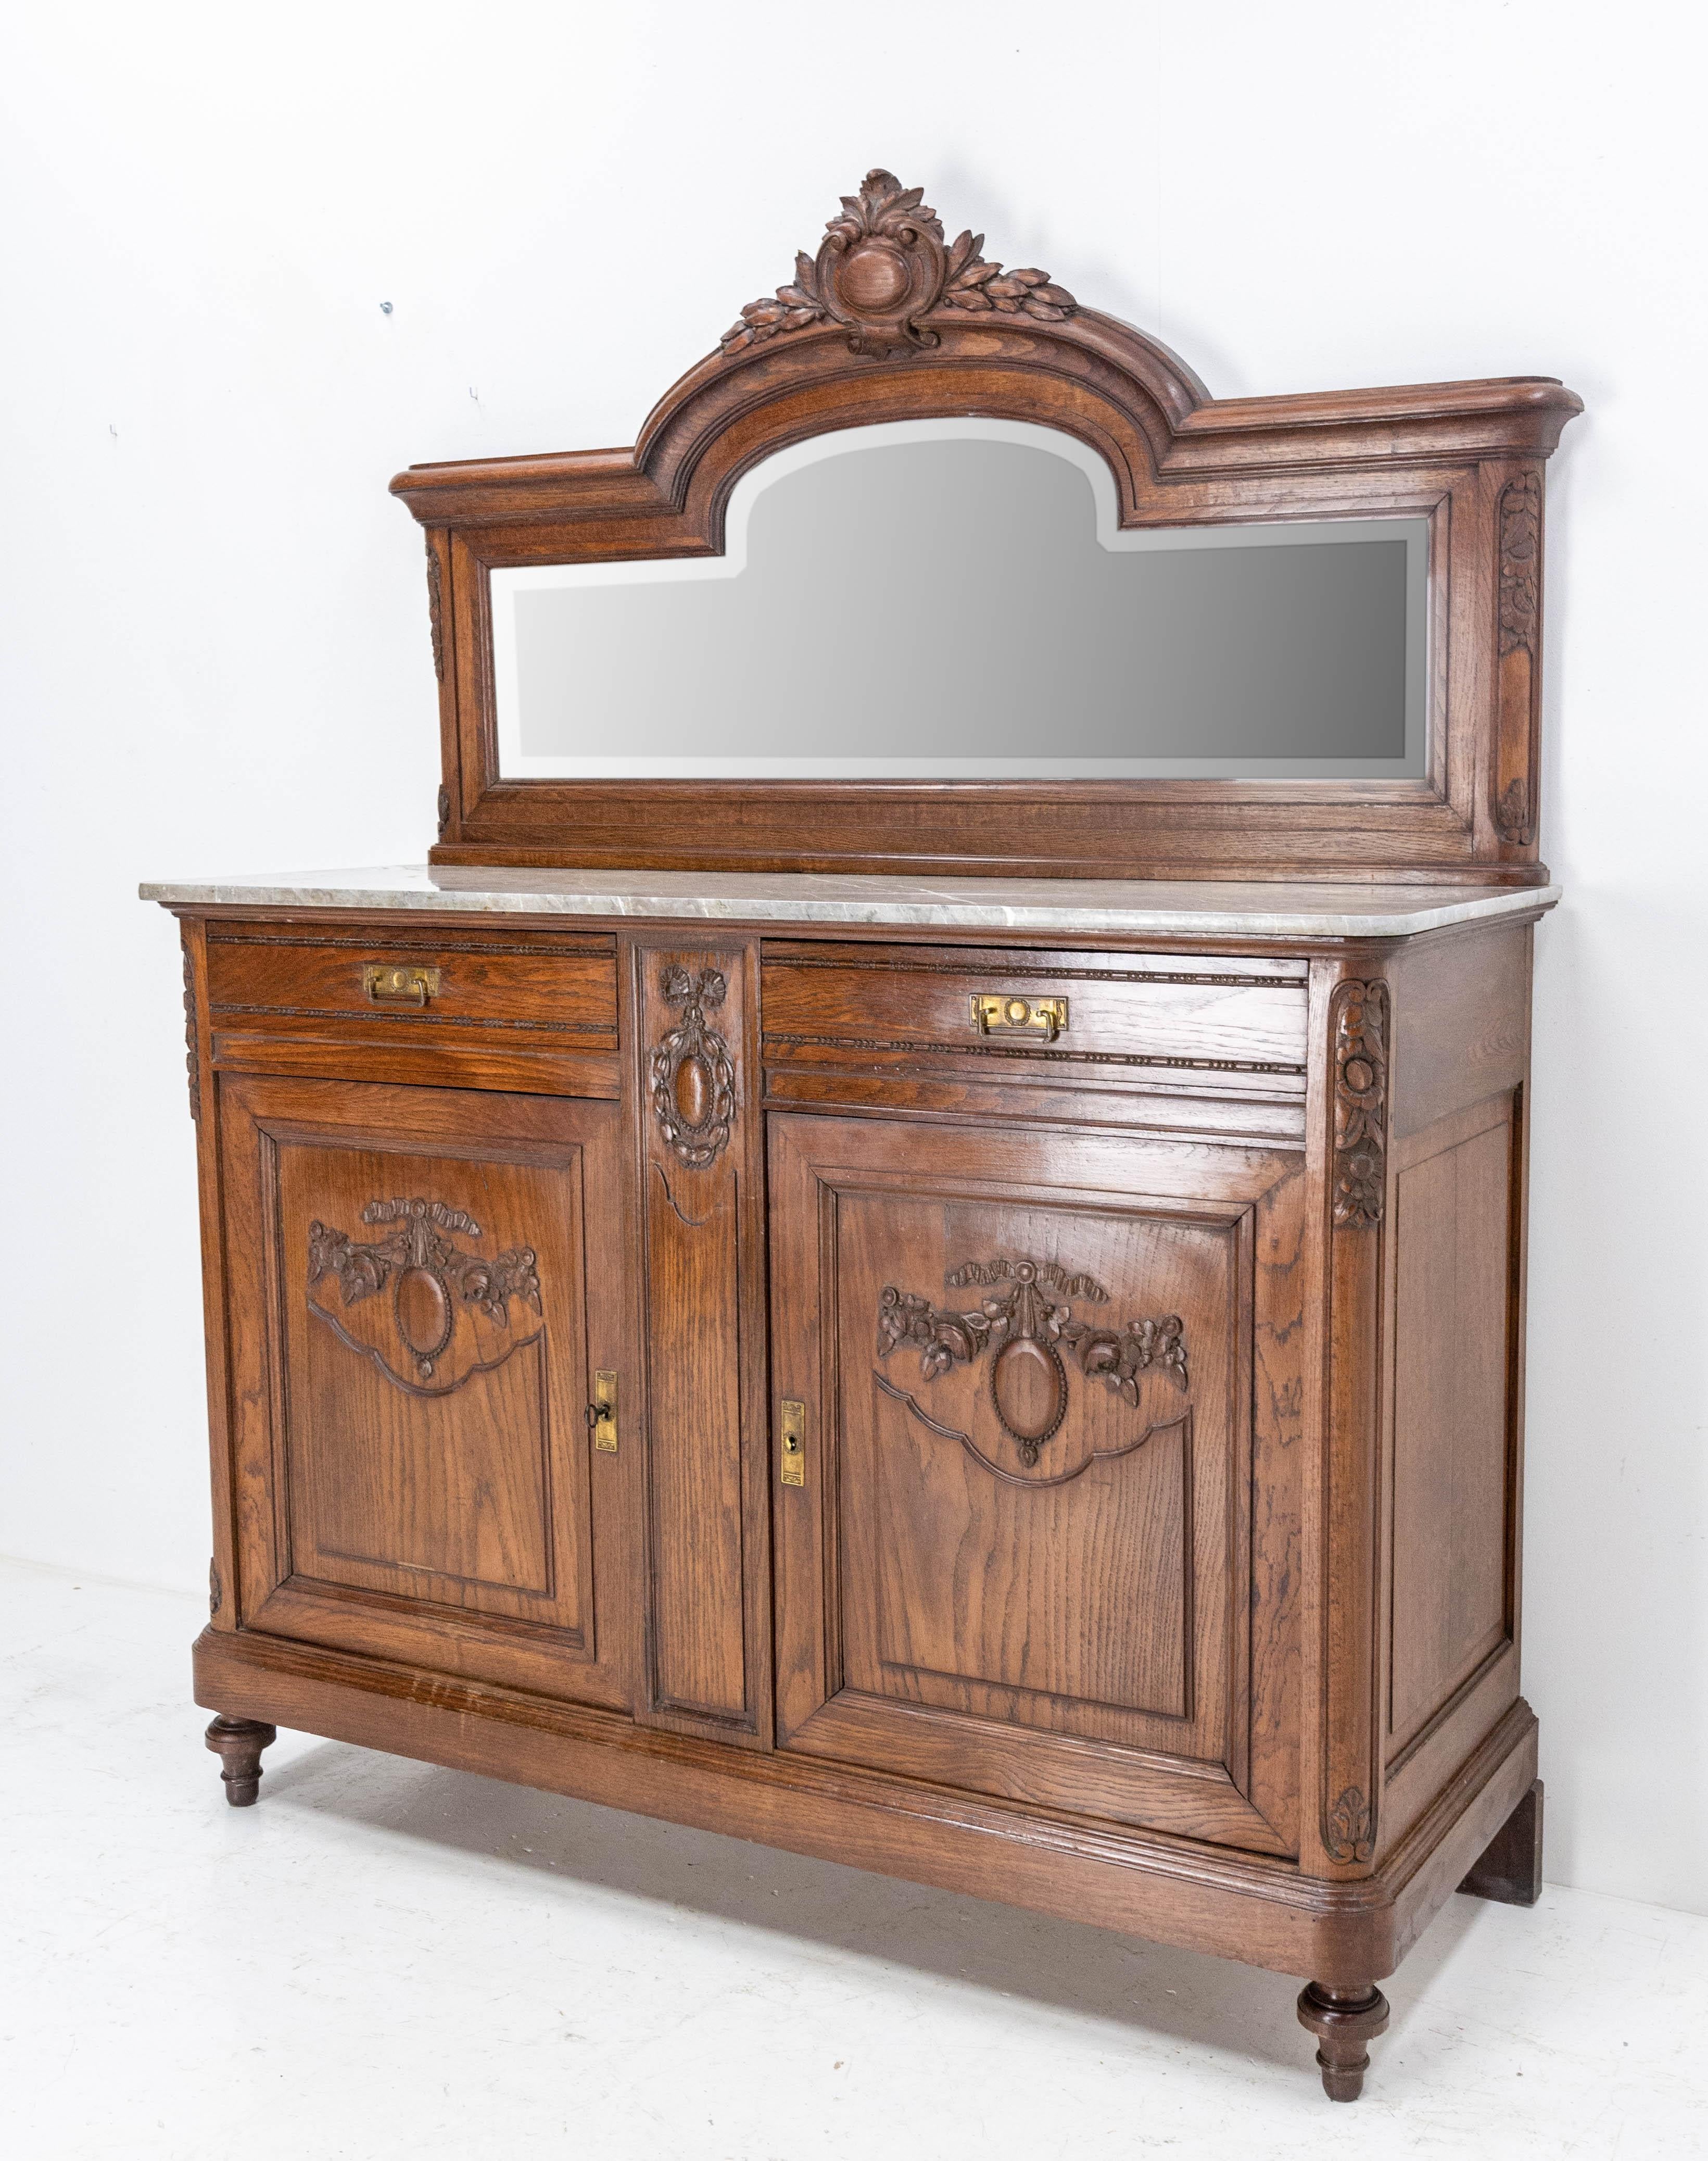 Credenza sideboard French dresser buffet, circa 1900.
Louis XVI style
Two drawers an two doors, and one shelf inside.
Pale honey figured walnut panels.
Oak panels decorated with carved flowers and medallions 
Beveled glass
Grey marble streaked